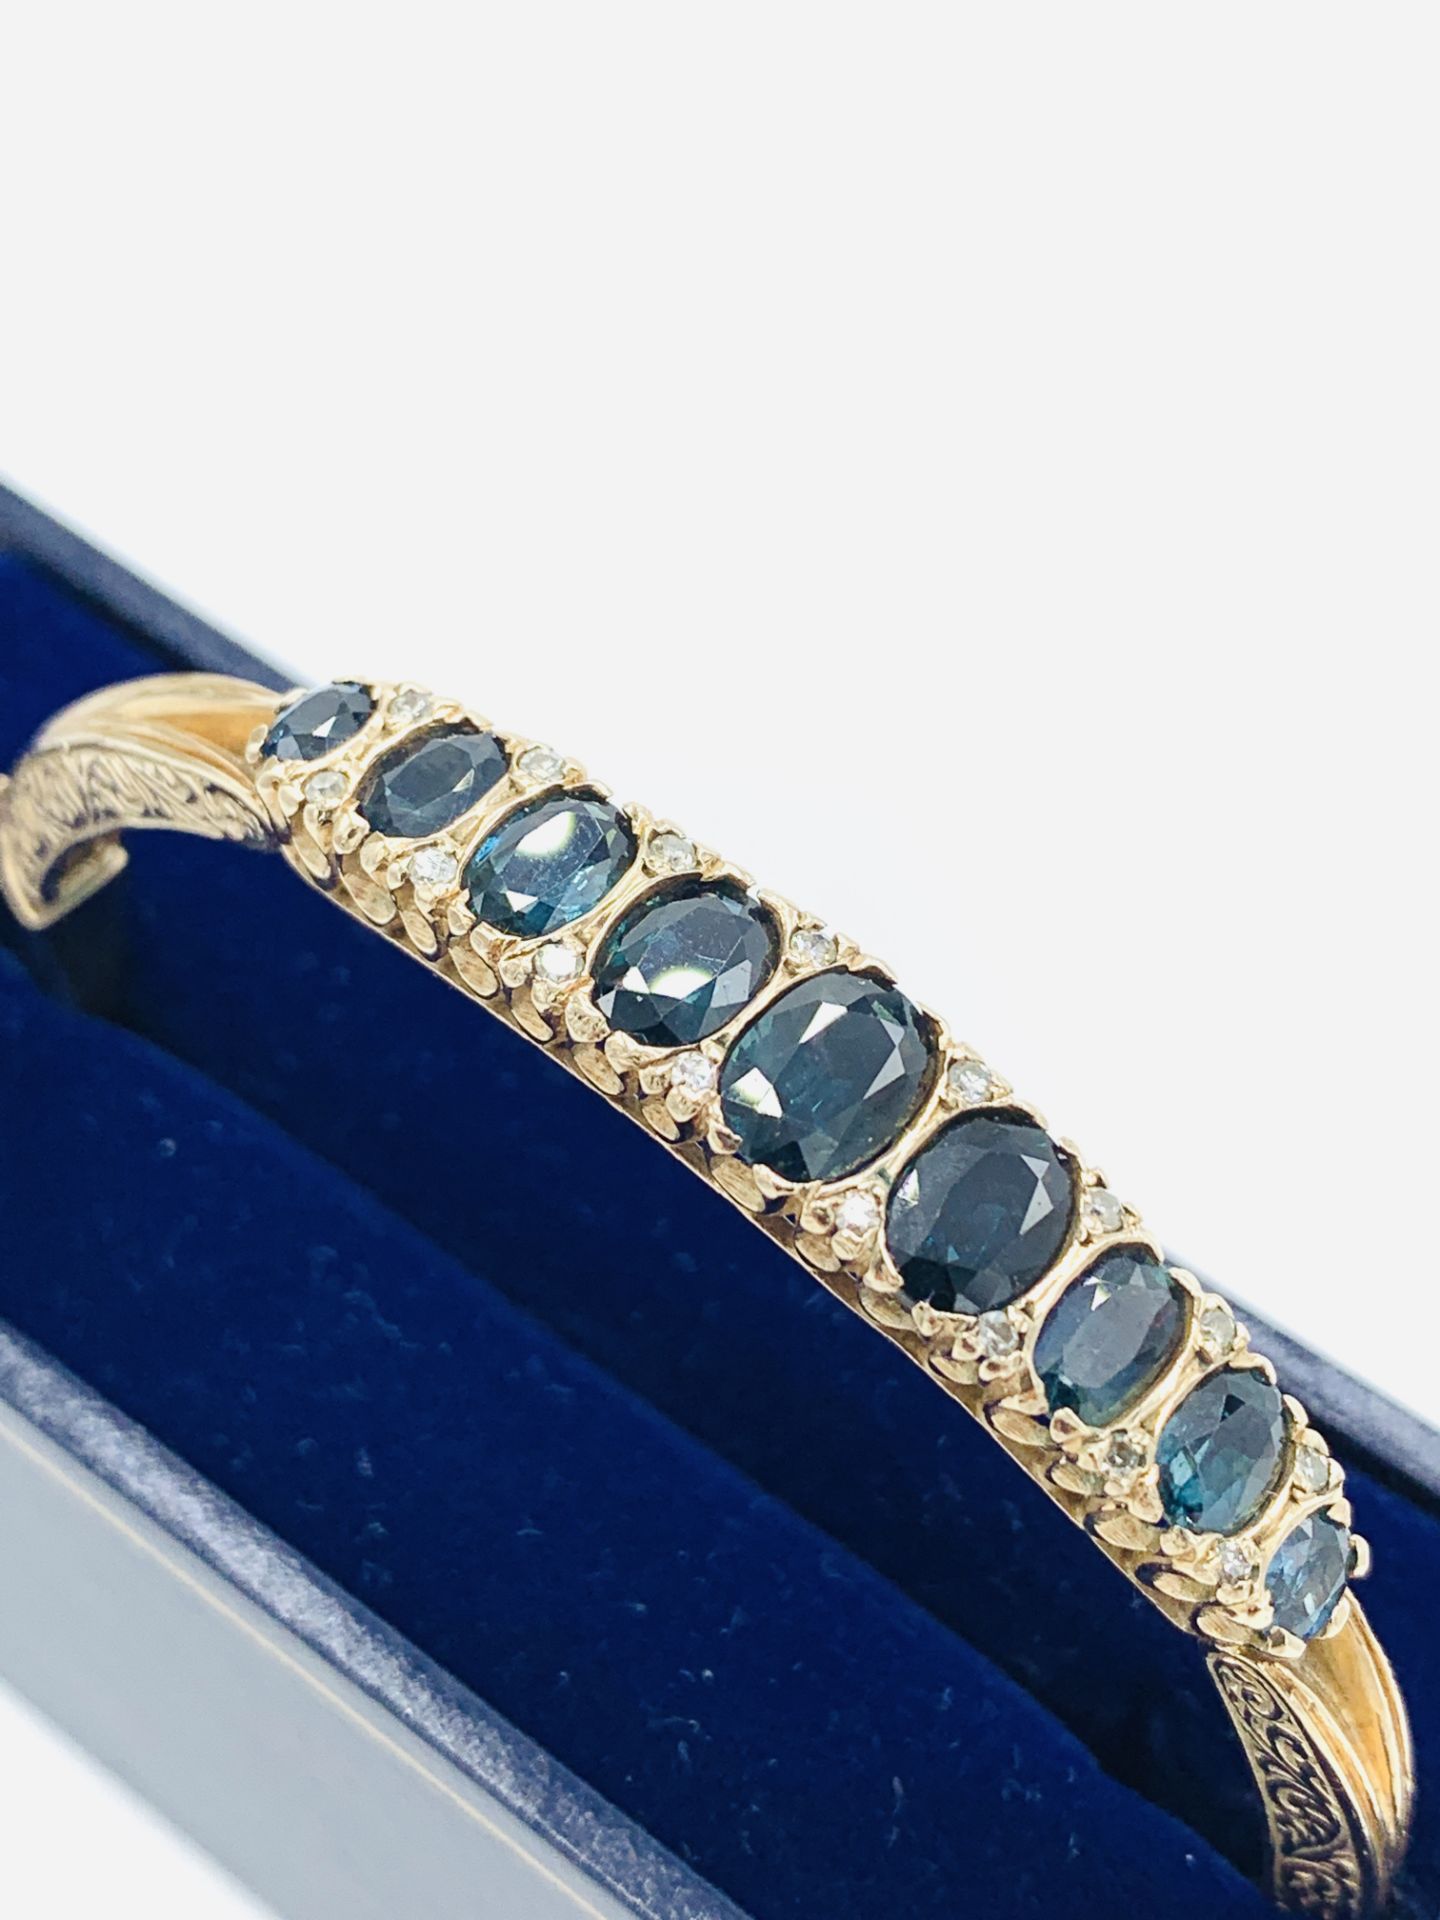 9ct gold bracelet set with 9 clawset graduated sapphires and small diamonds. - Image 4 of 4